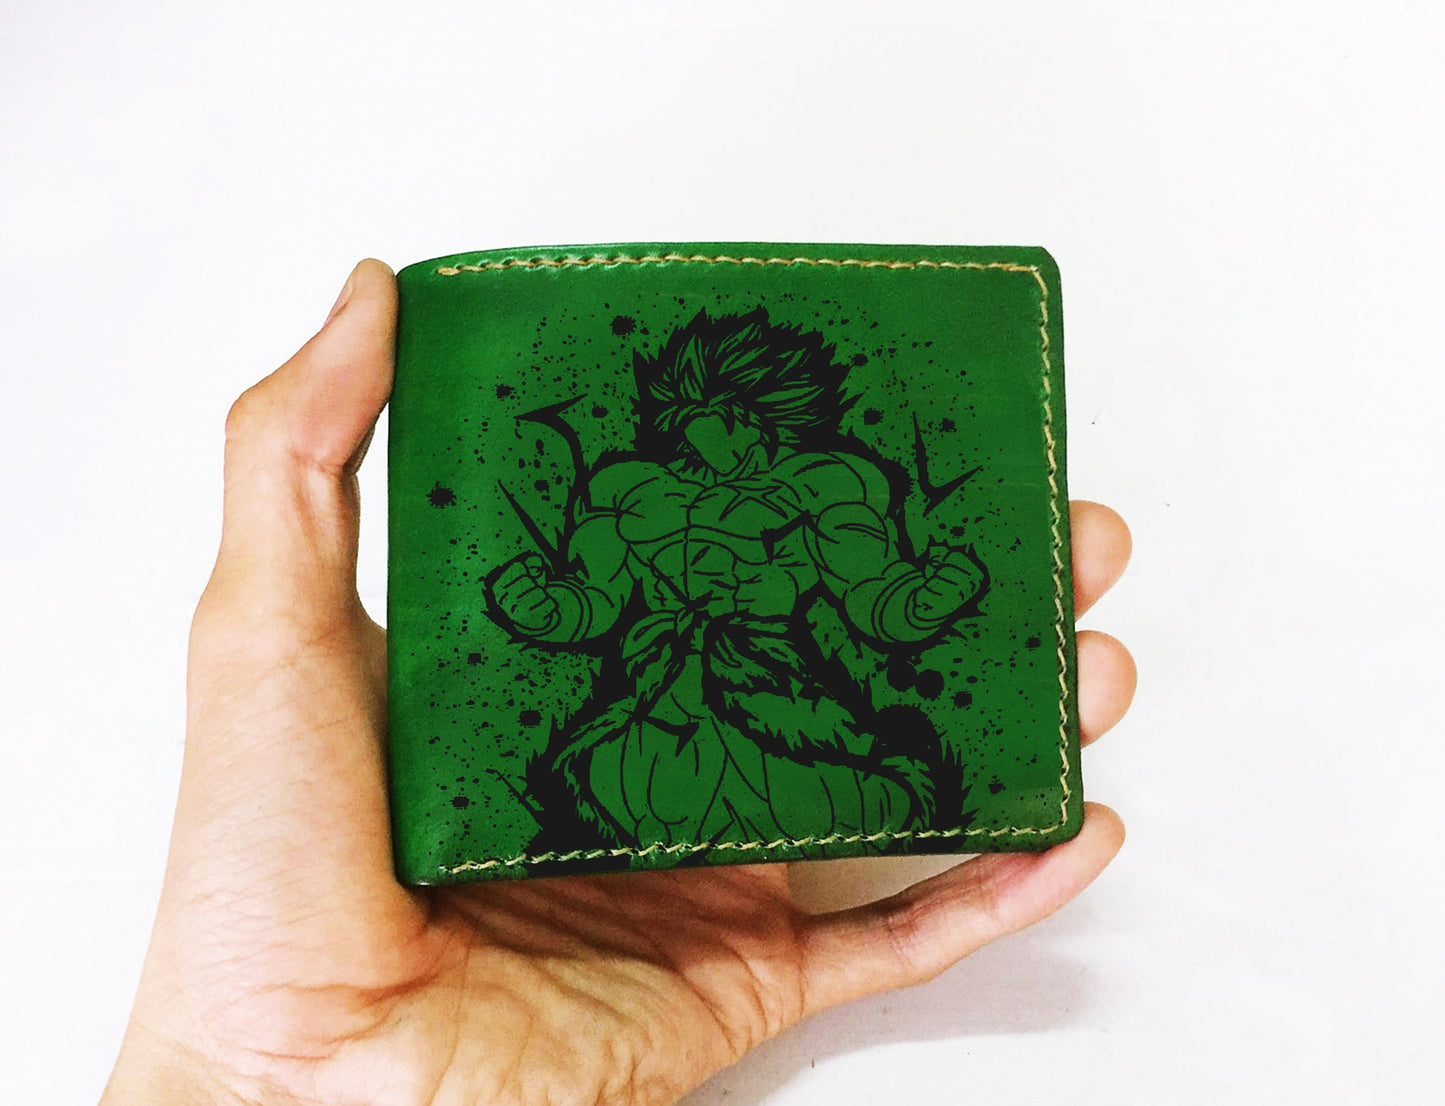 Mayan Corner - Customized leather handmade wallet, Cell dragon ball leather gift, dragon ball characters art wallet